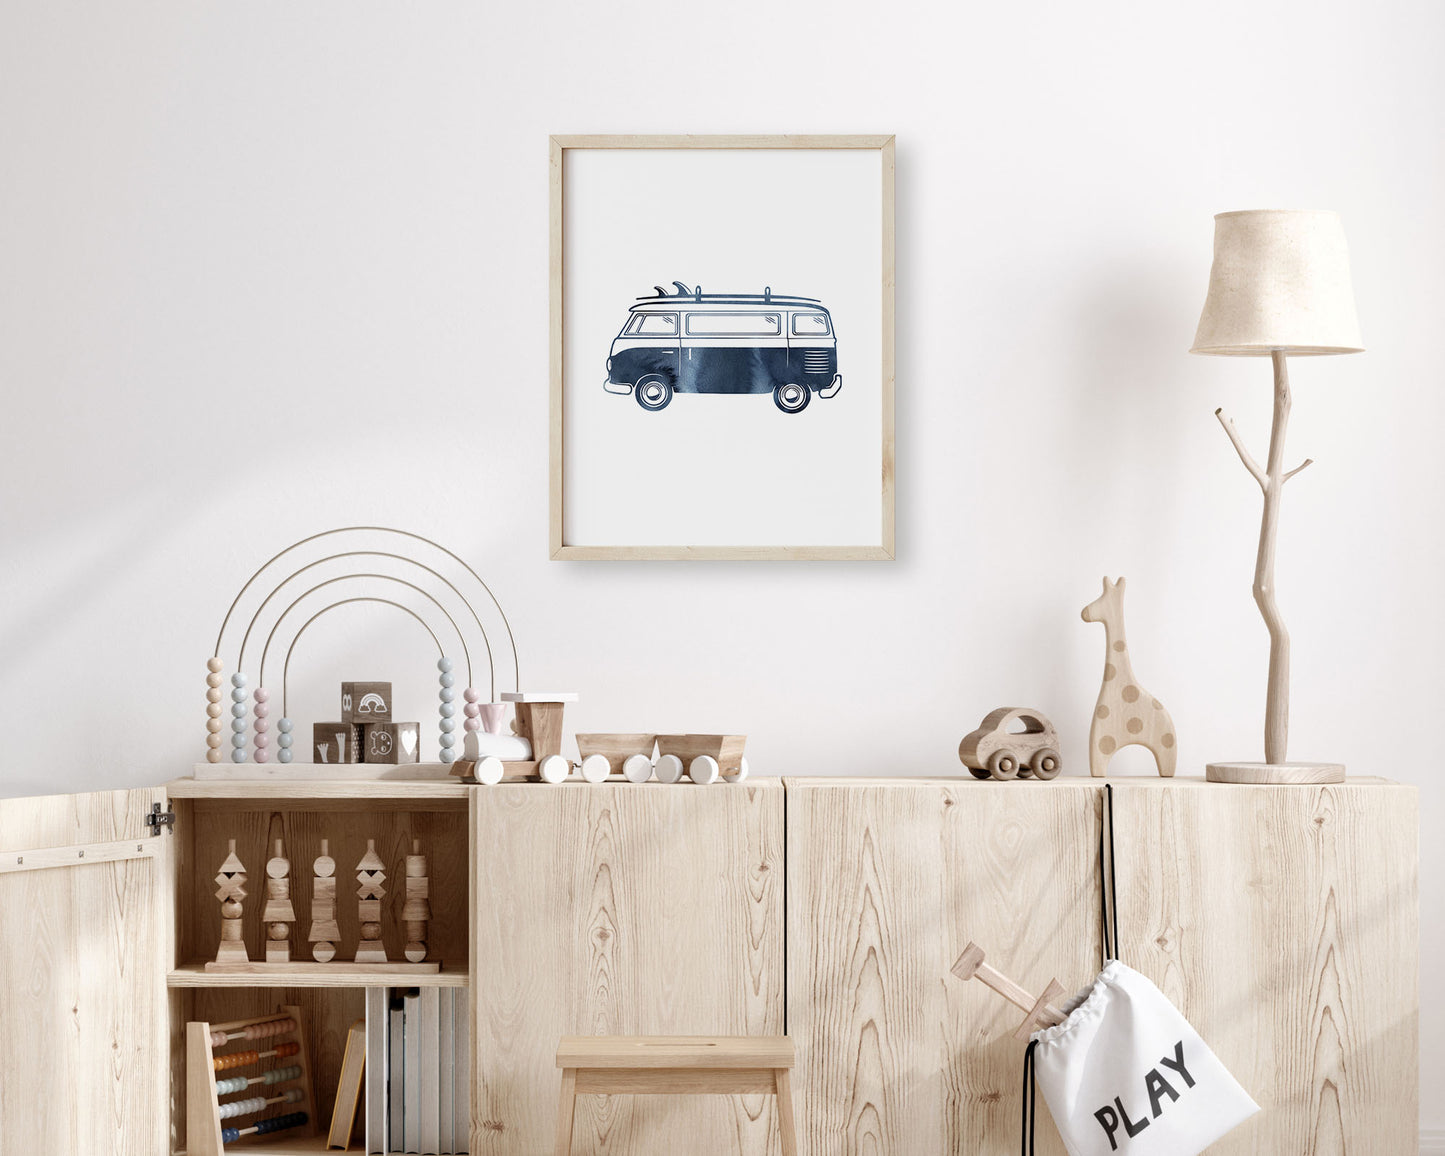 Watercolor Surf Van Printable Wall Art featuring navy blue watercolor illustration of a retro van with a surfboard on top.